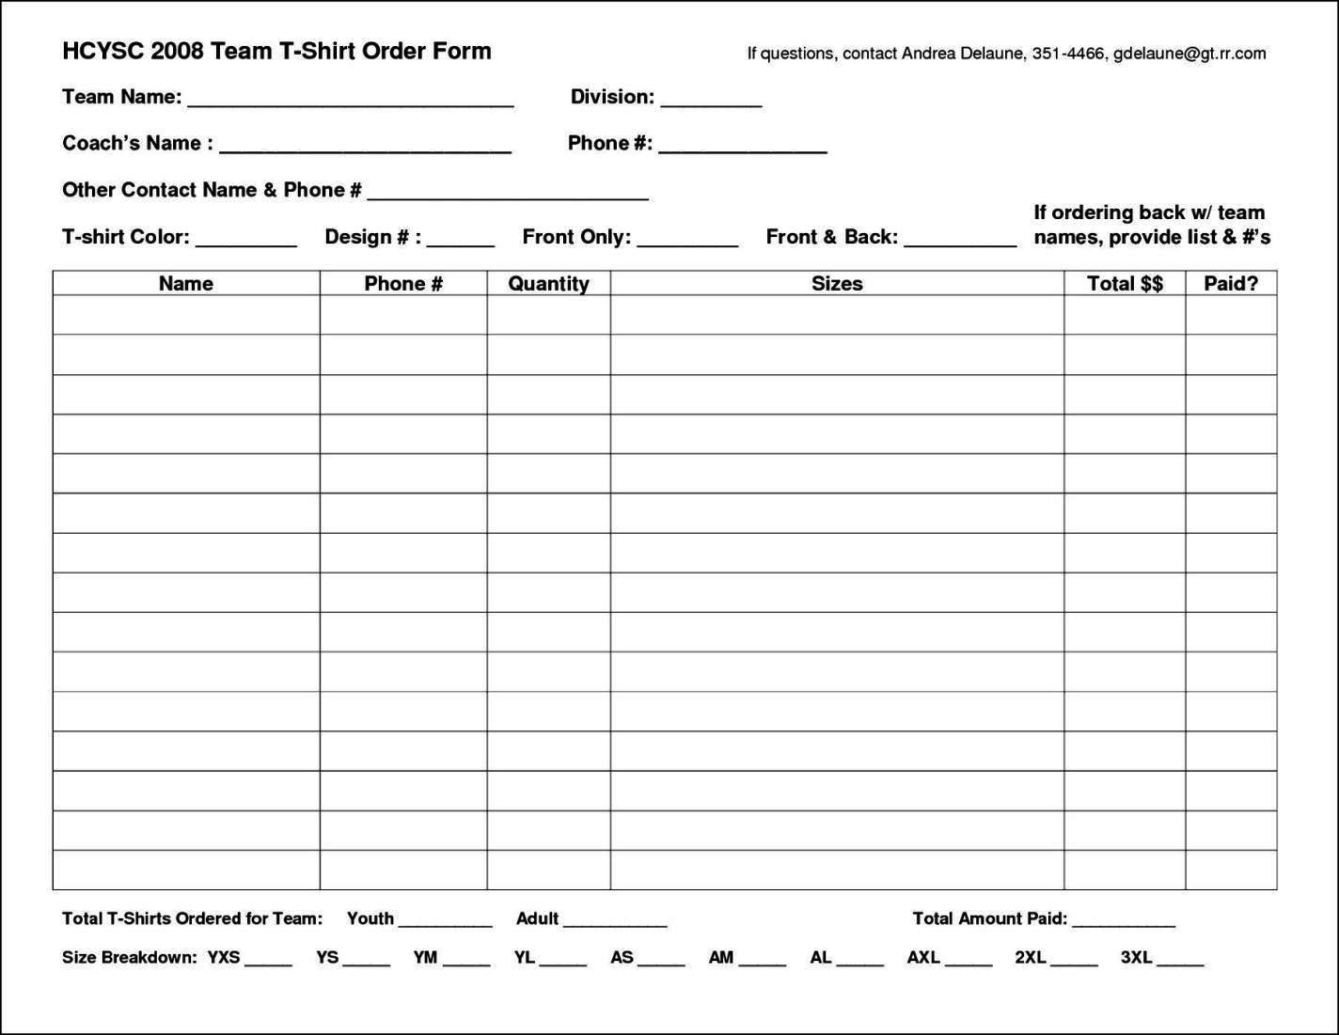 Product Order Form Template Excel - Sampletemplatess with regard to Blank T Shirt Order Form Template